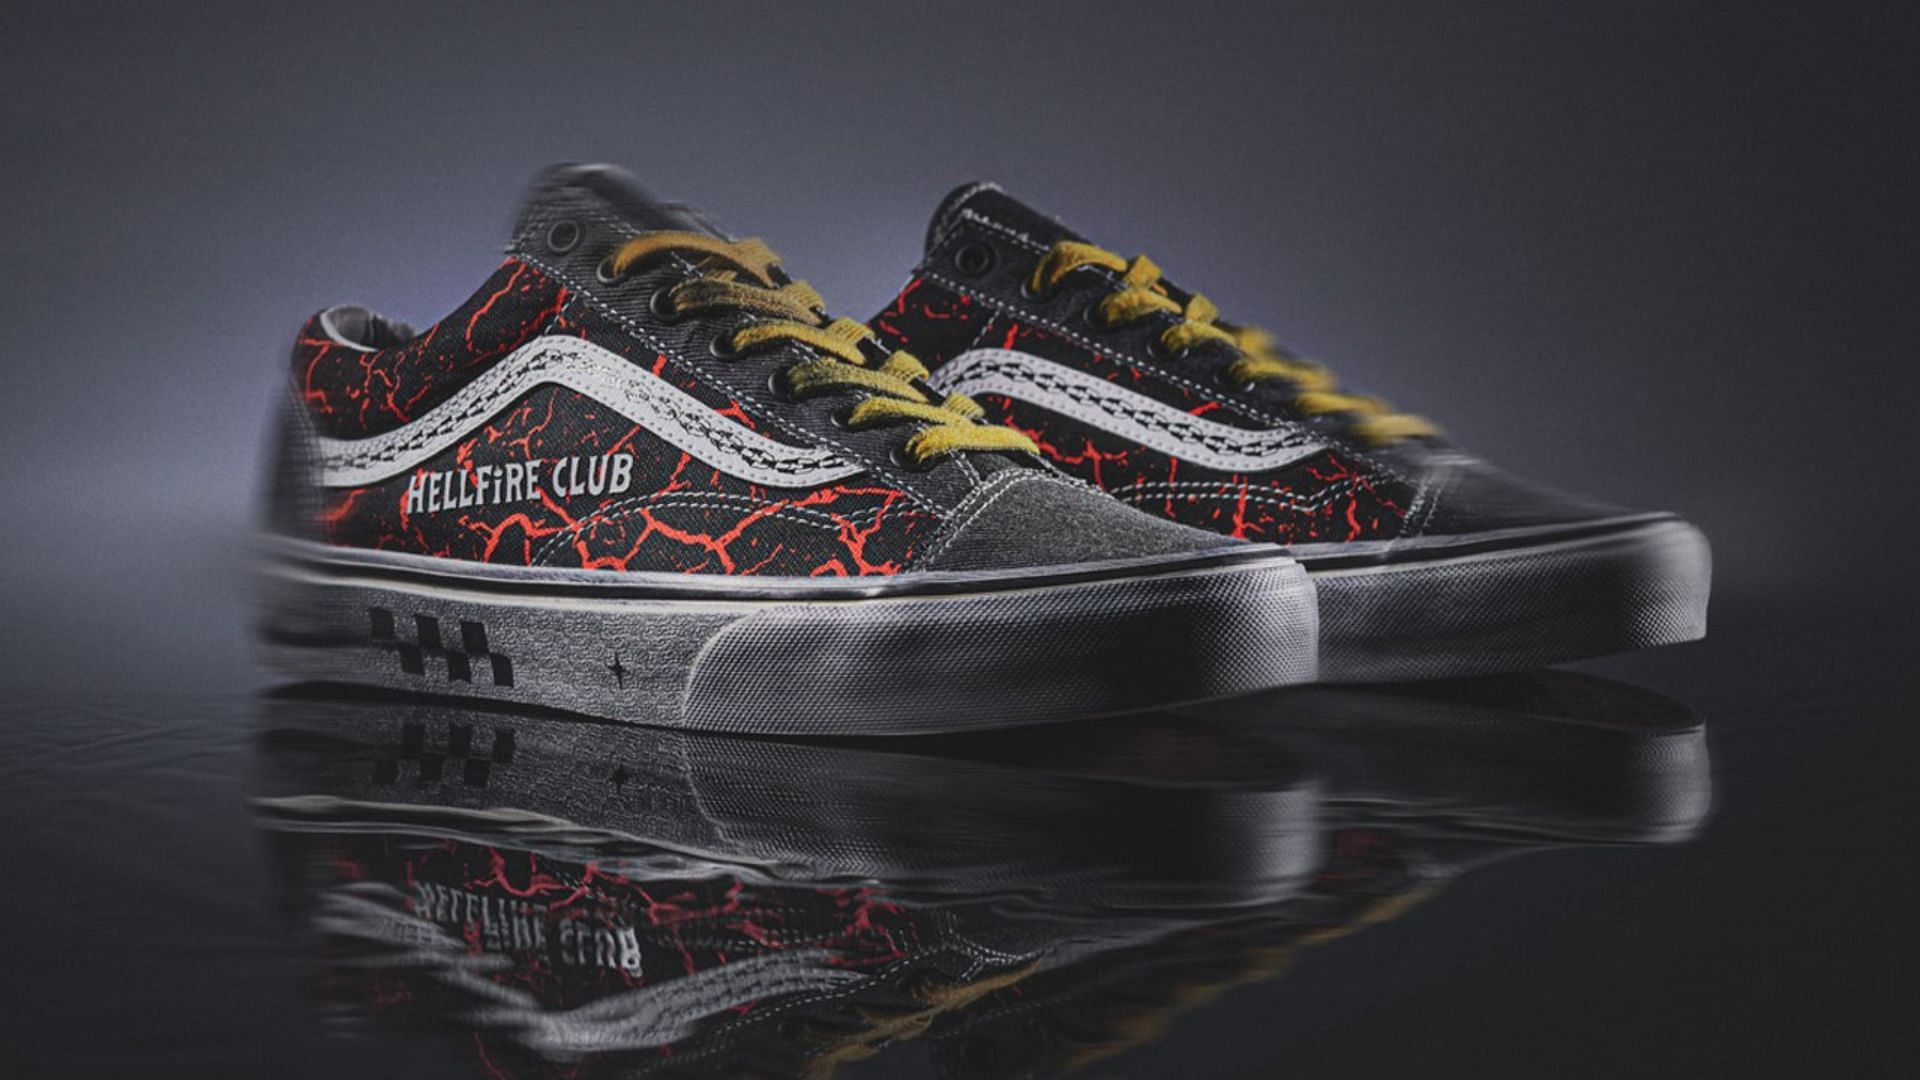 Take a look at the Hellfire Club Style 36 shoes (Image via Vans.com)